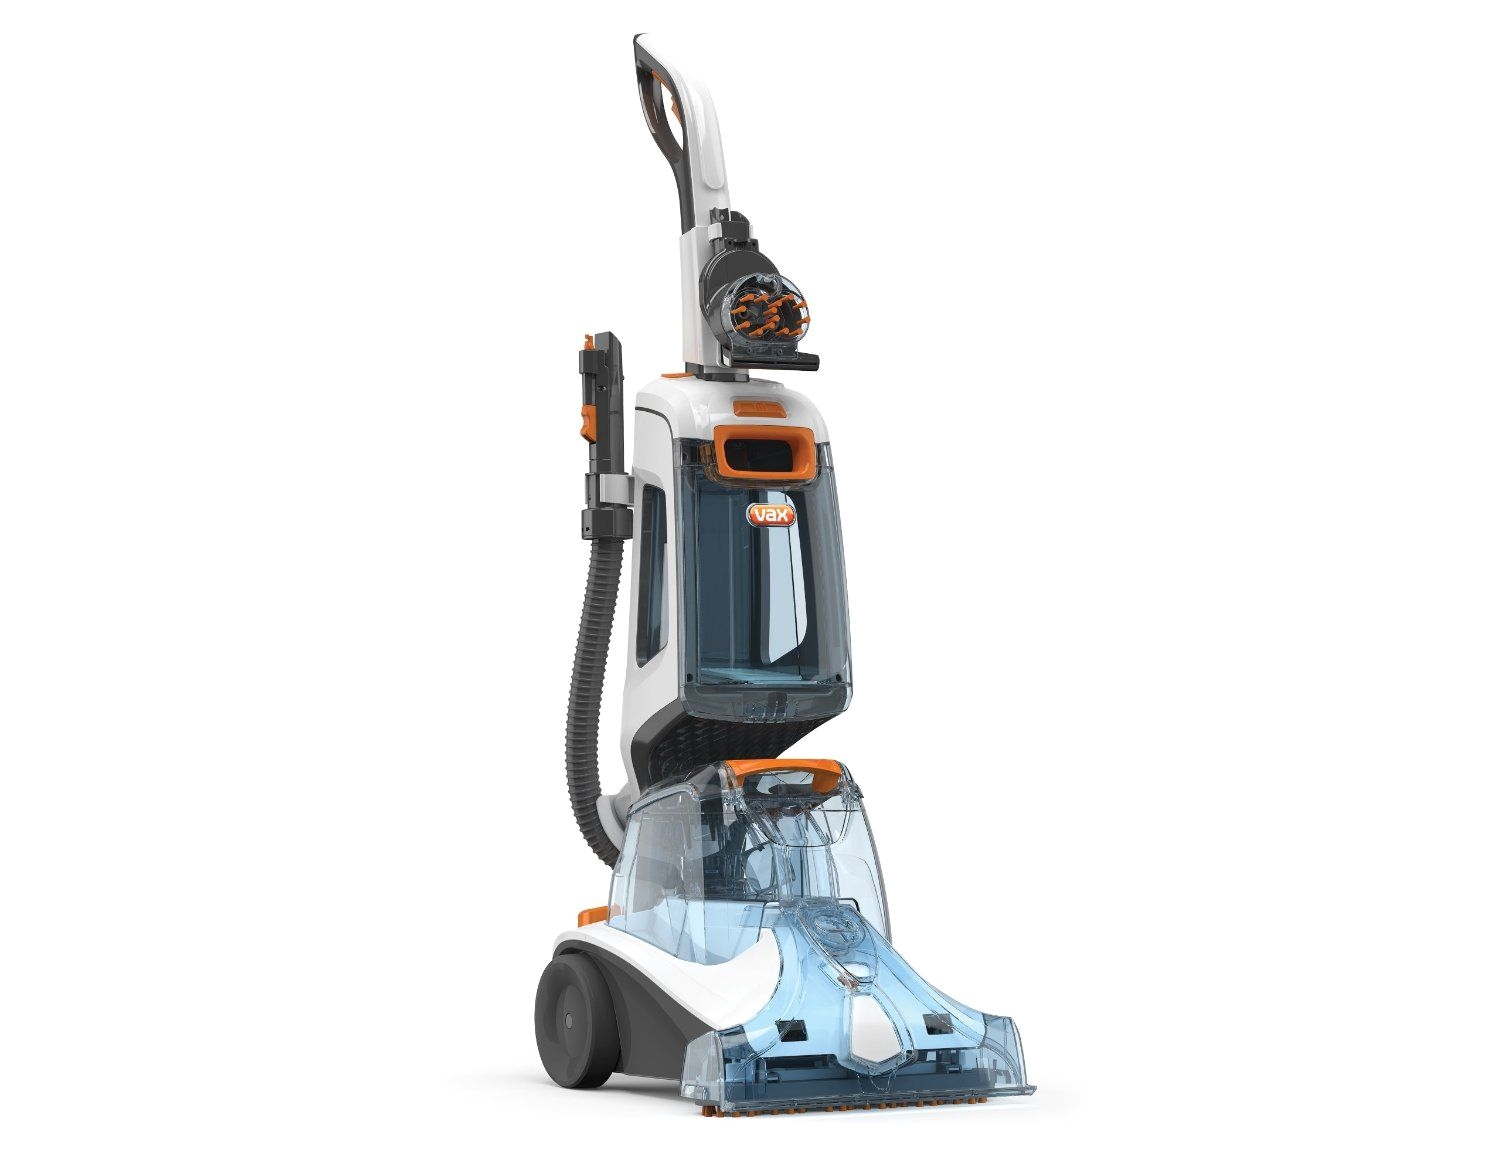 vax w87 dv b dual v advance upright carpet and upholstery washer amazon